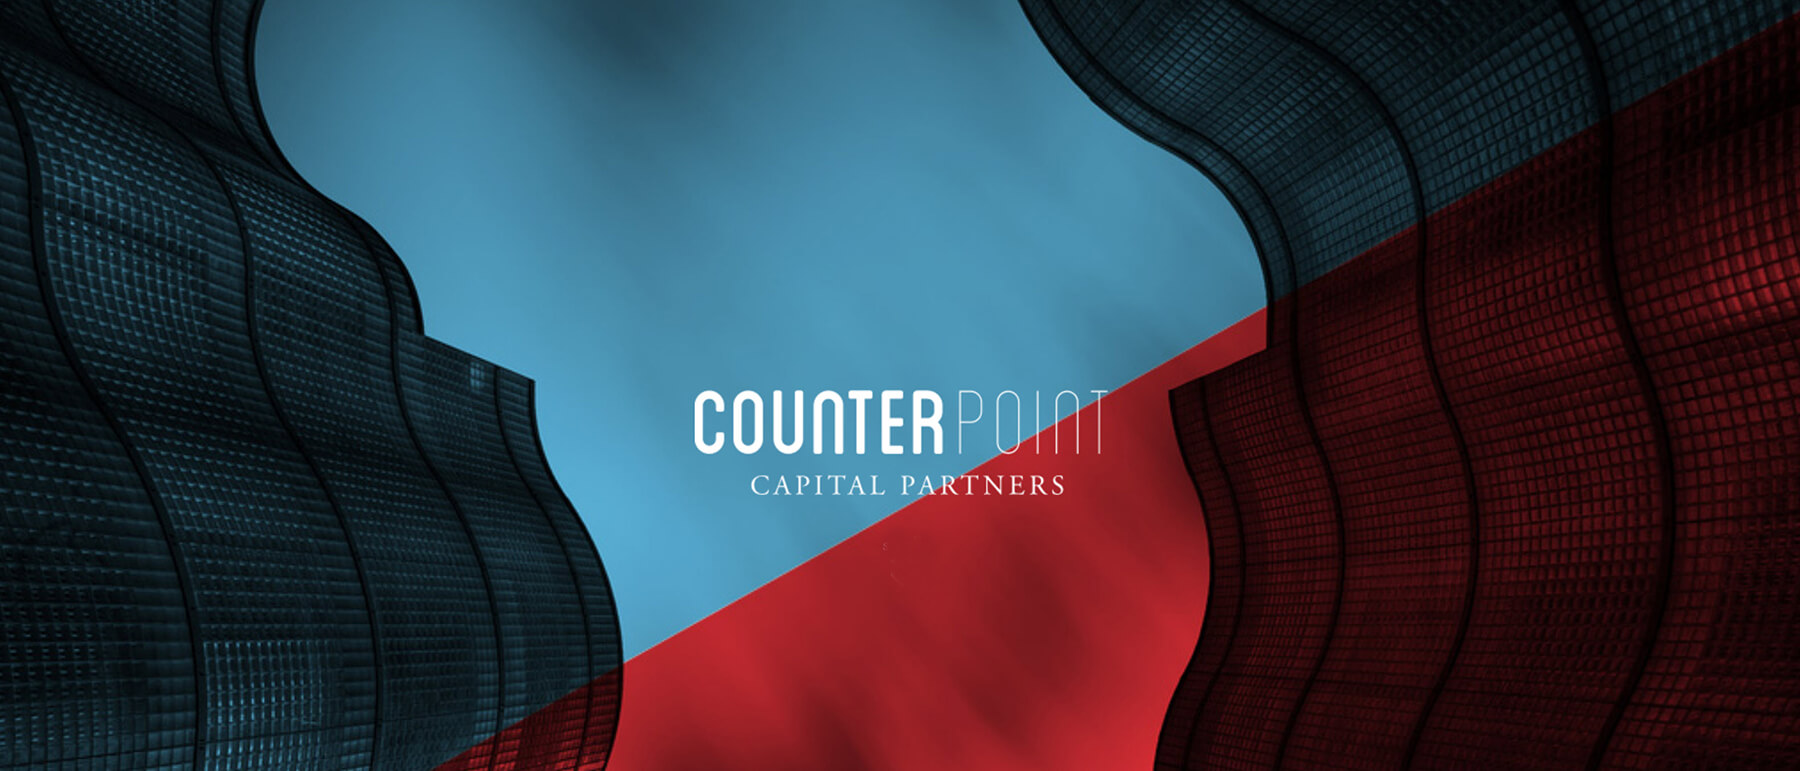 Counterpoint Capital Partners